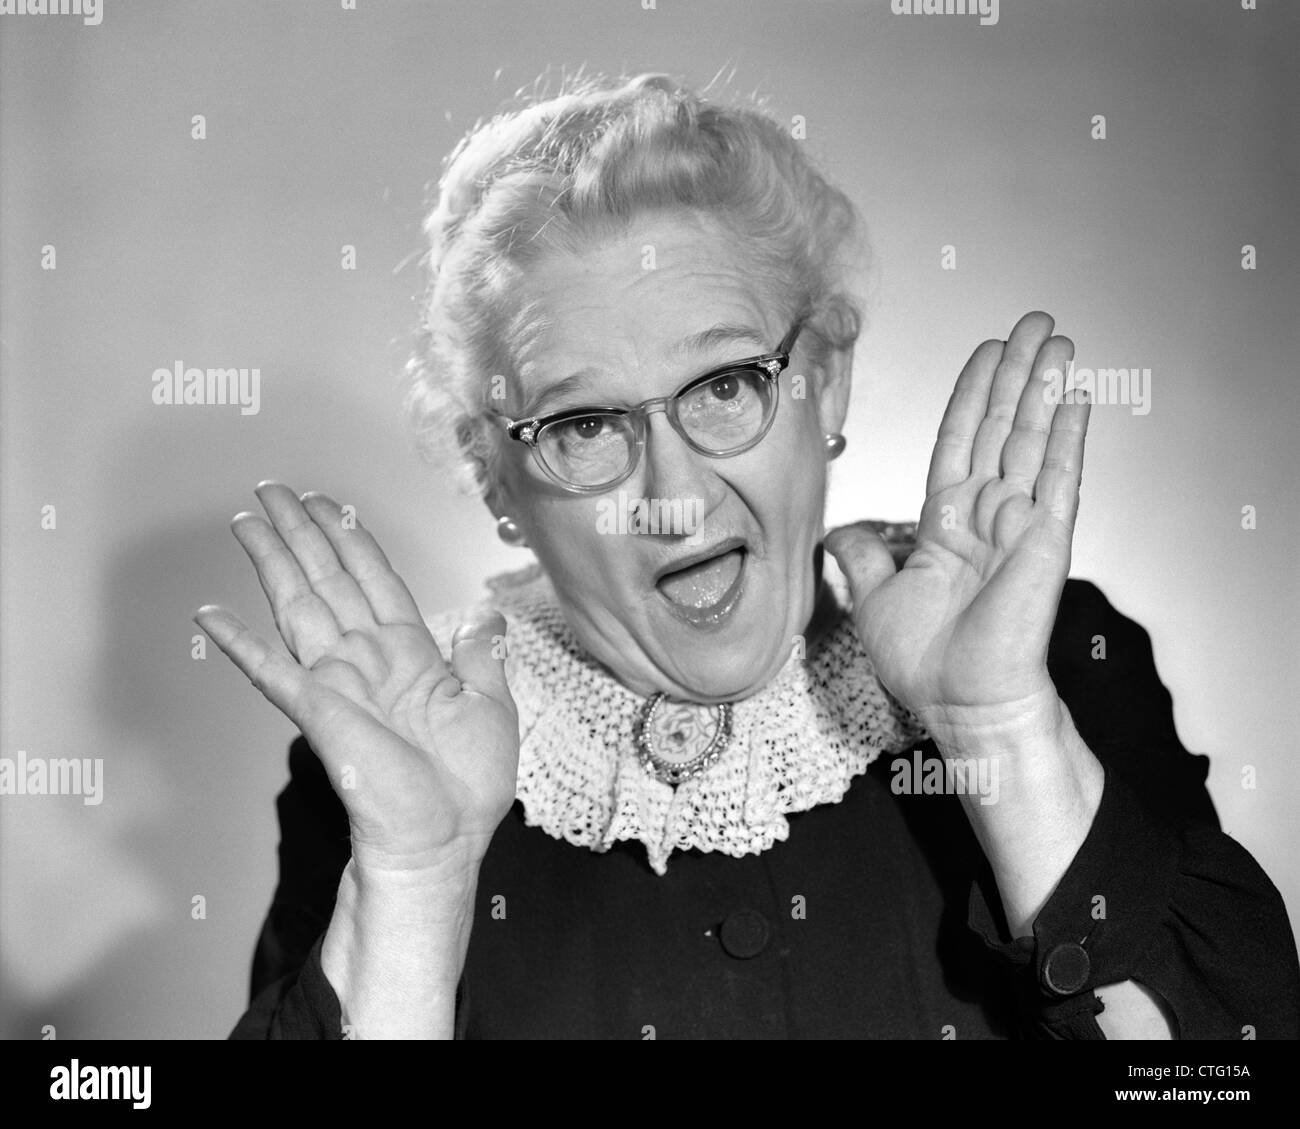 1960s ELDERLY WOMAN IN GRANNY GLASSES HOLDING HAND UP NEAR FACE WITH MOUTH OPEN LOOKING AT CAMERA Stock Photo